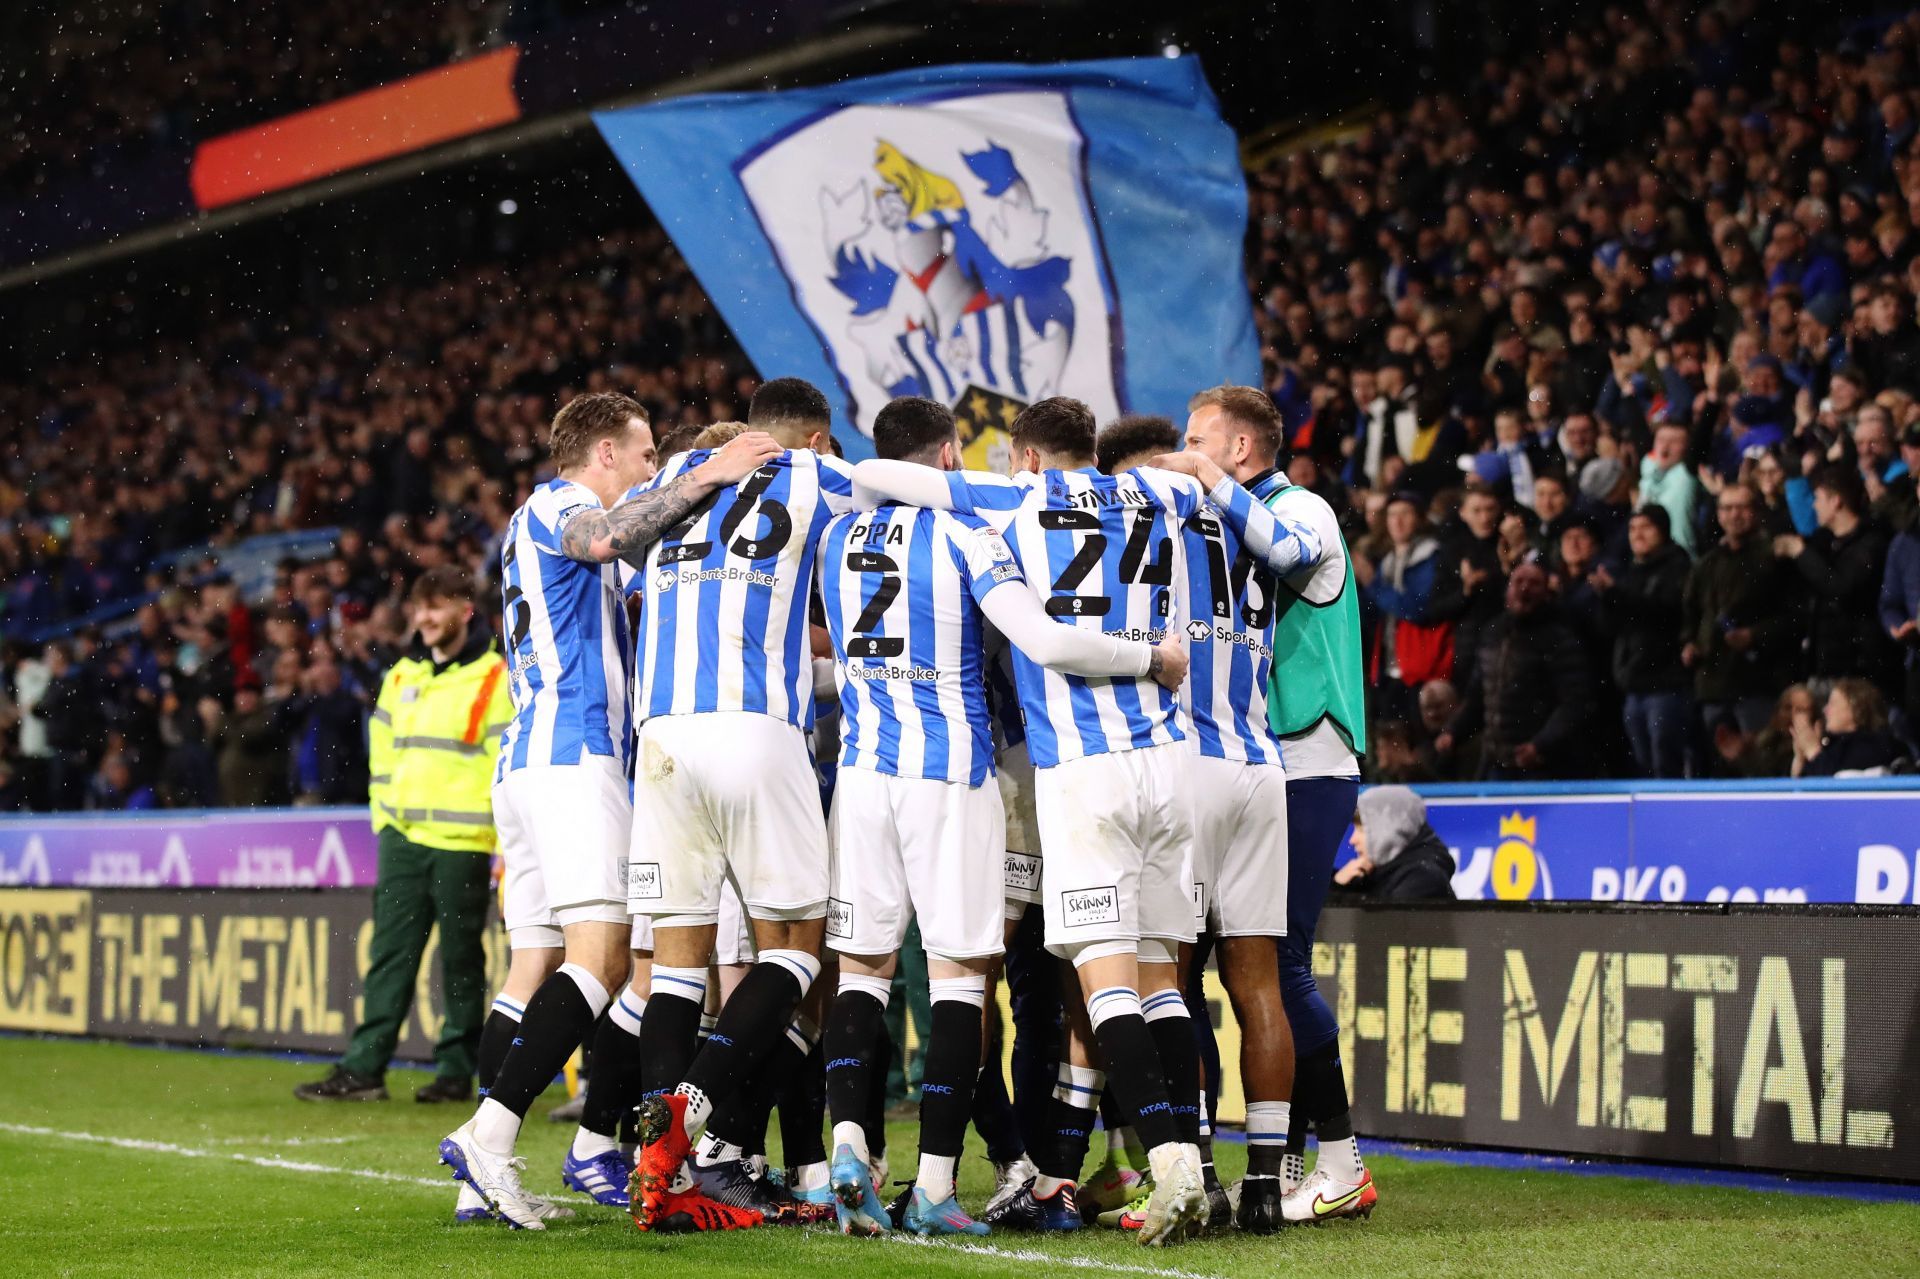 Huddersfield will be looking for the win